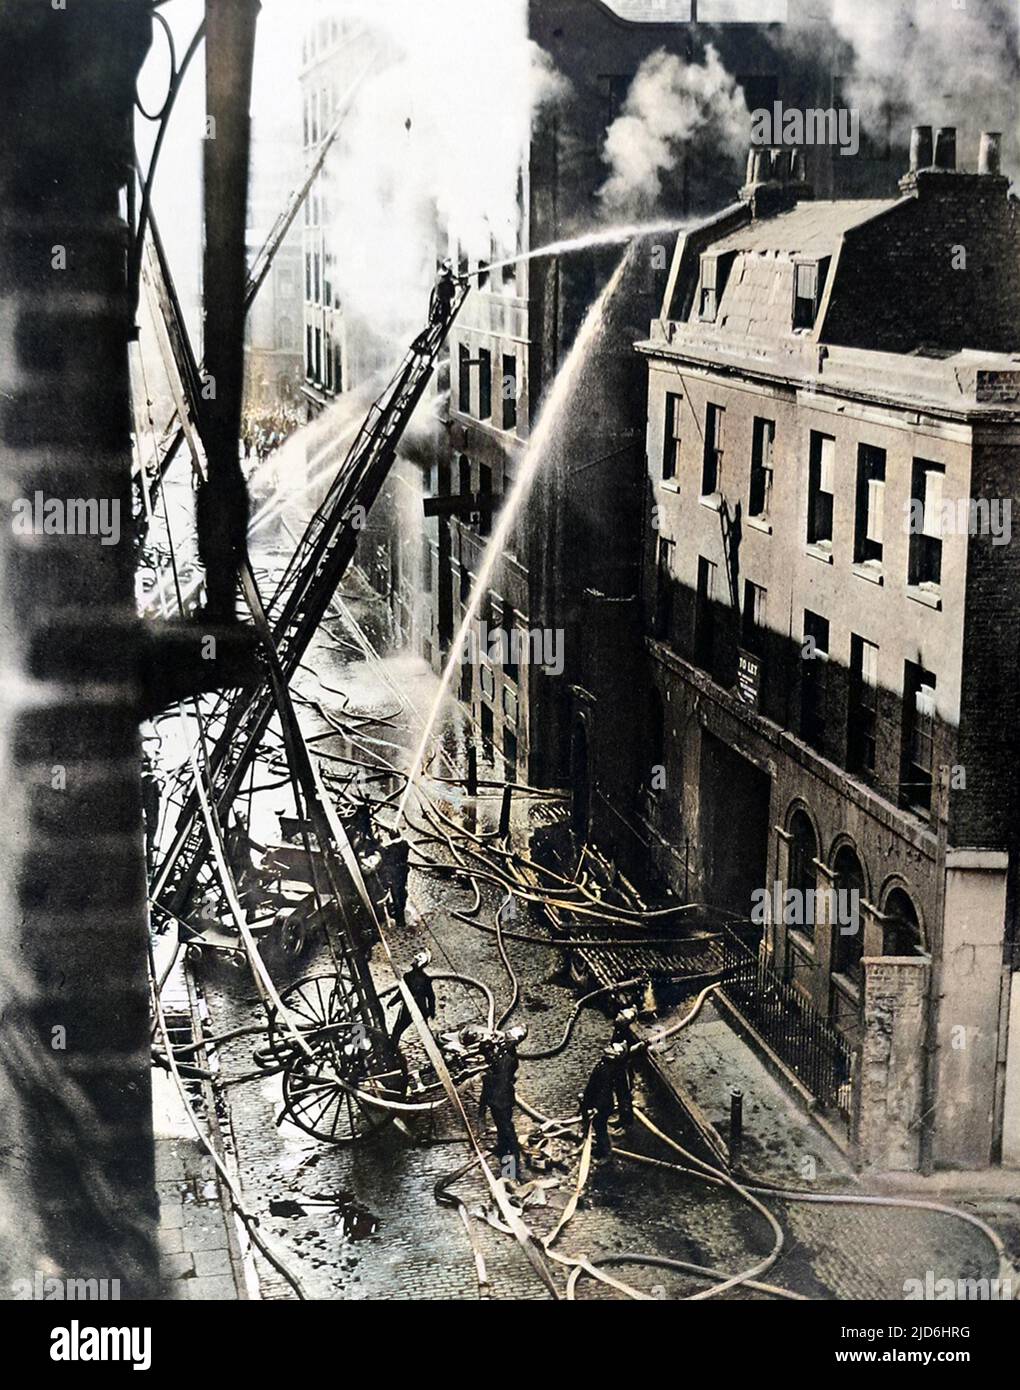 Members of the London Fire Brigade tackling a blaze at Samuel Ward & Co.'s paint and varnish warehouse in Great Guildford Street, Southwark, August 1926. Colourised version of: 10220885       Date: 1926 Stock Photo